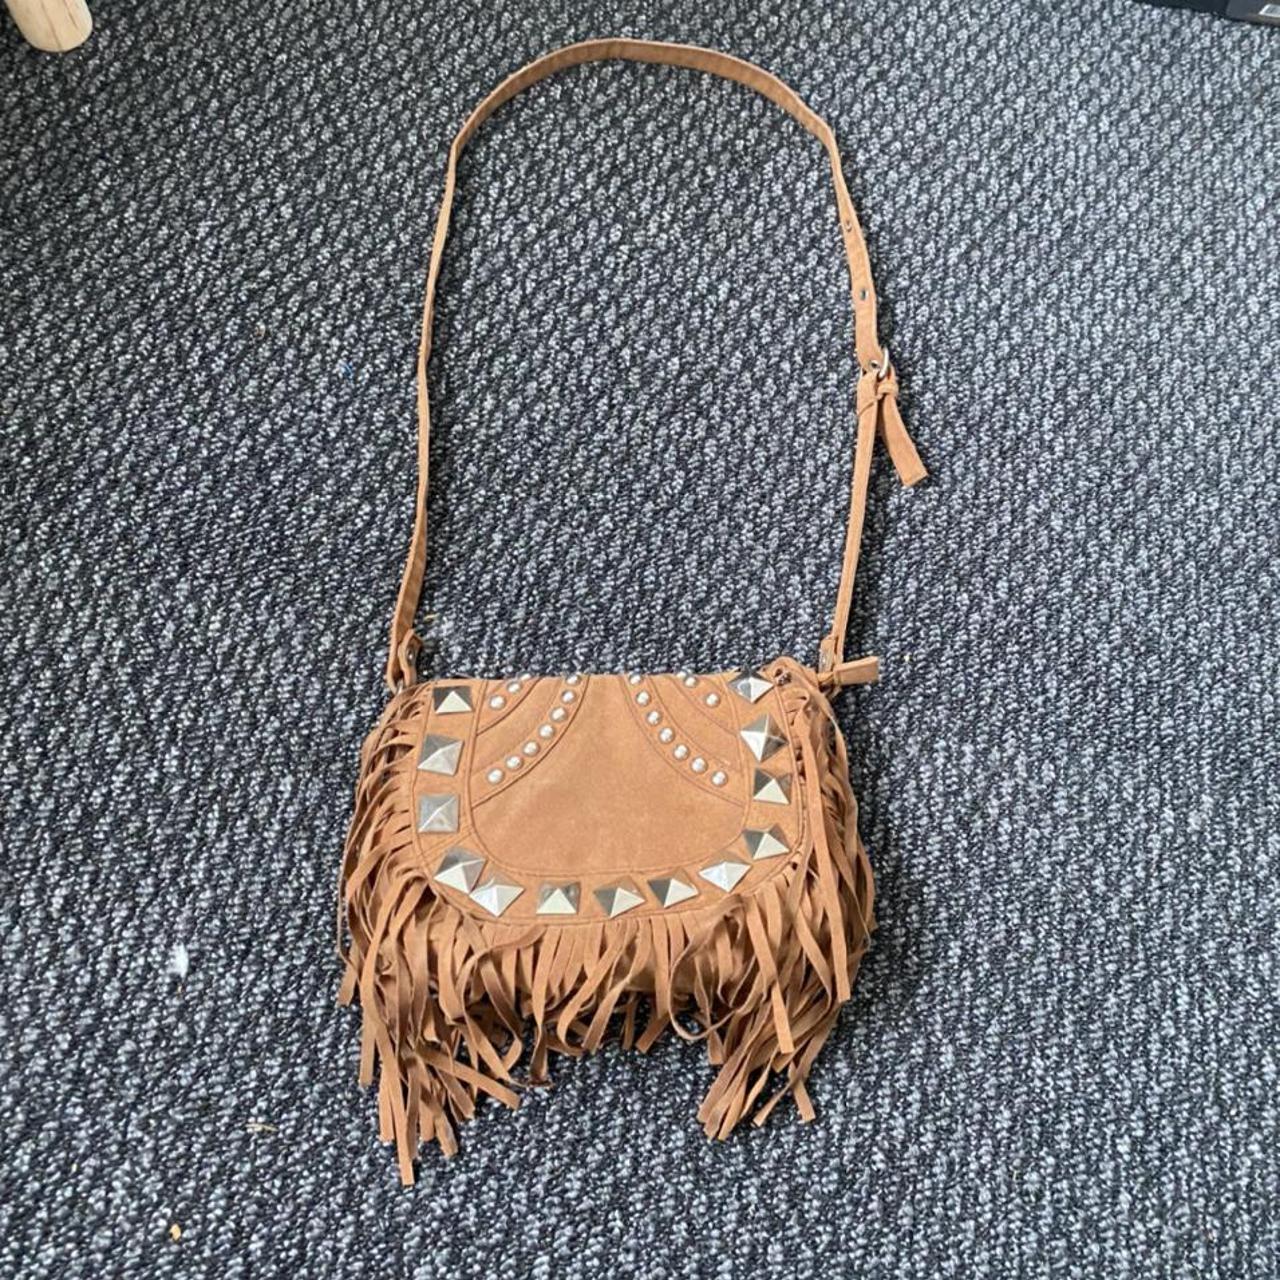 Product Image 2 - Brown suede fringe cross body